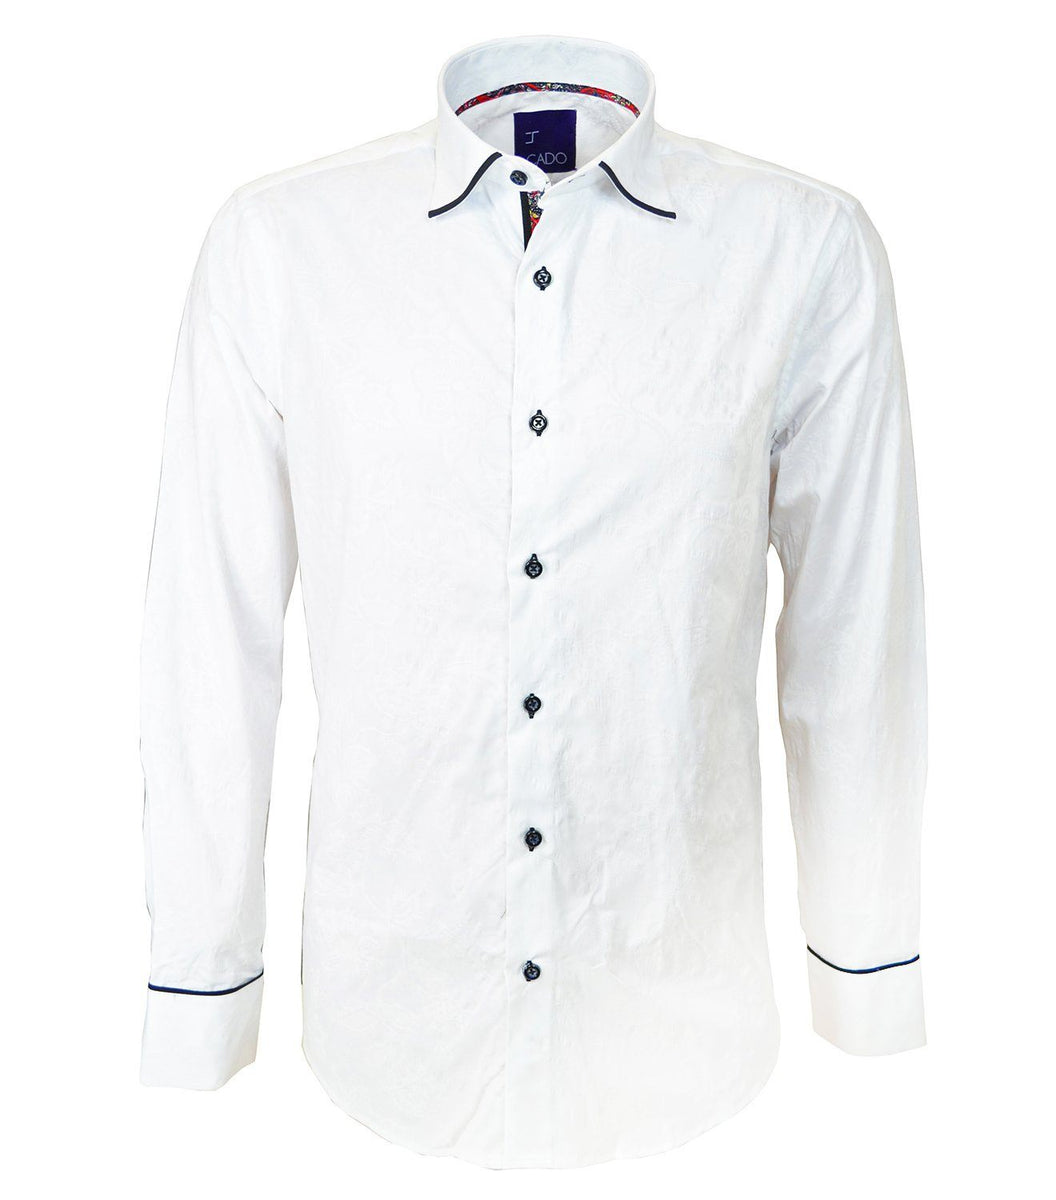 The Essential Solid White Dress Shirt